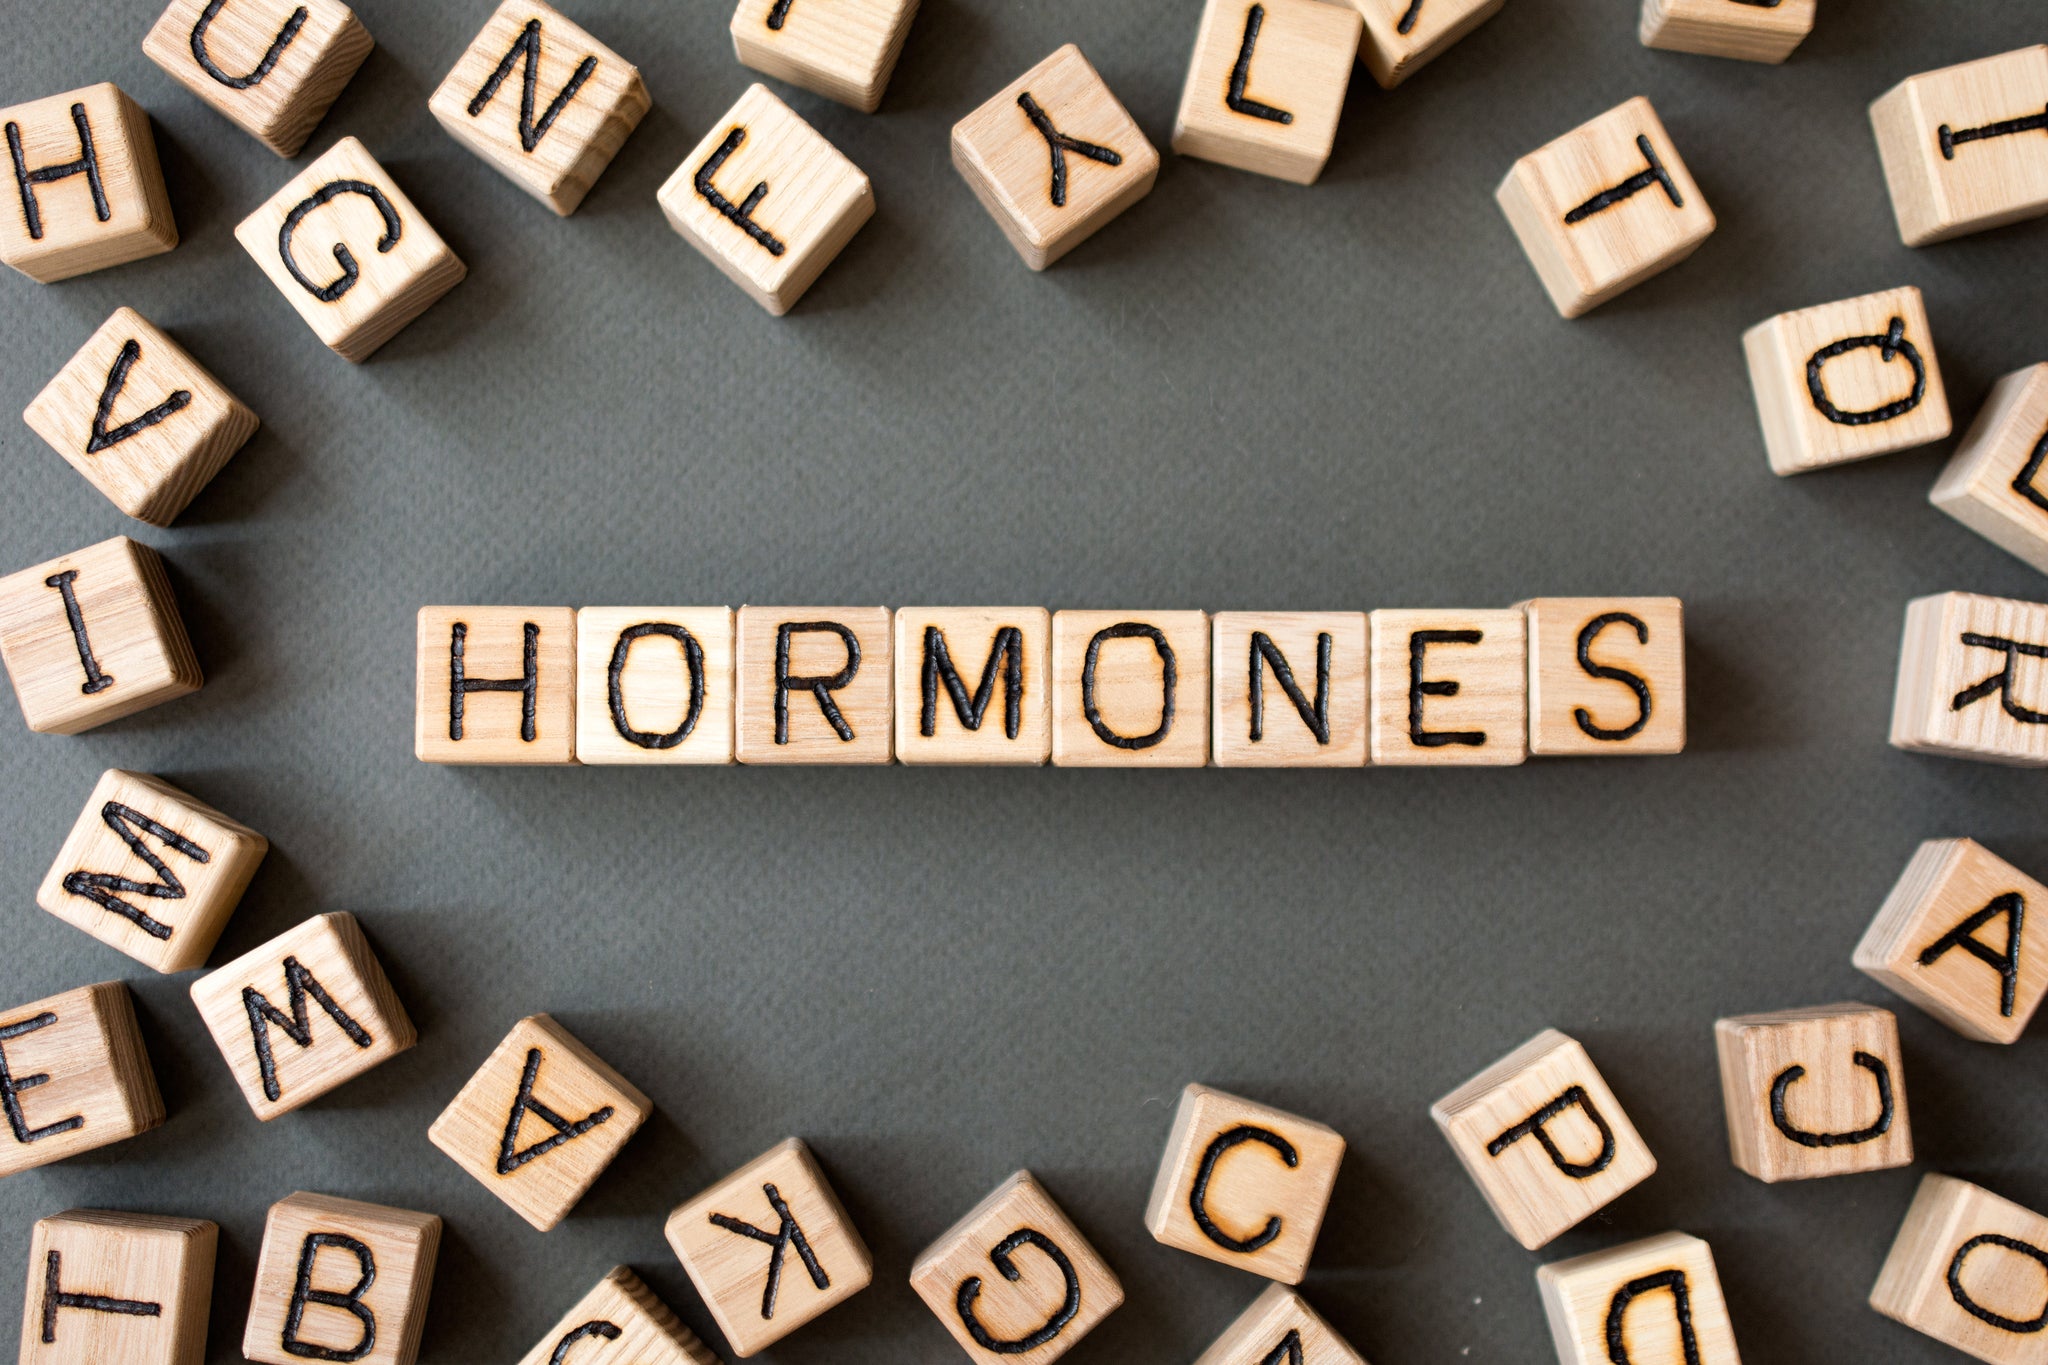 How can vitamins help with hormone imbalance?